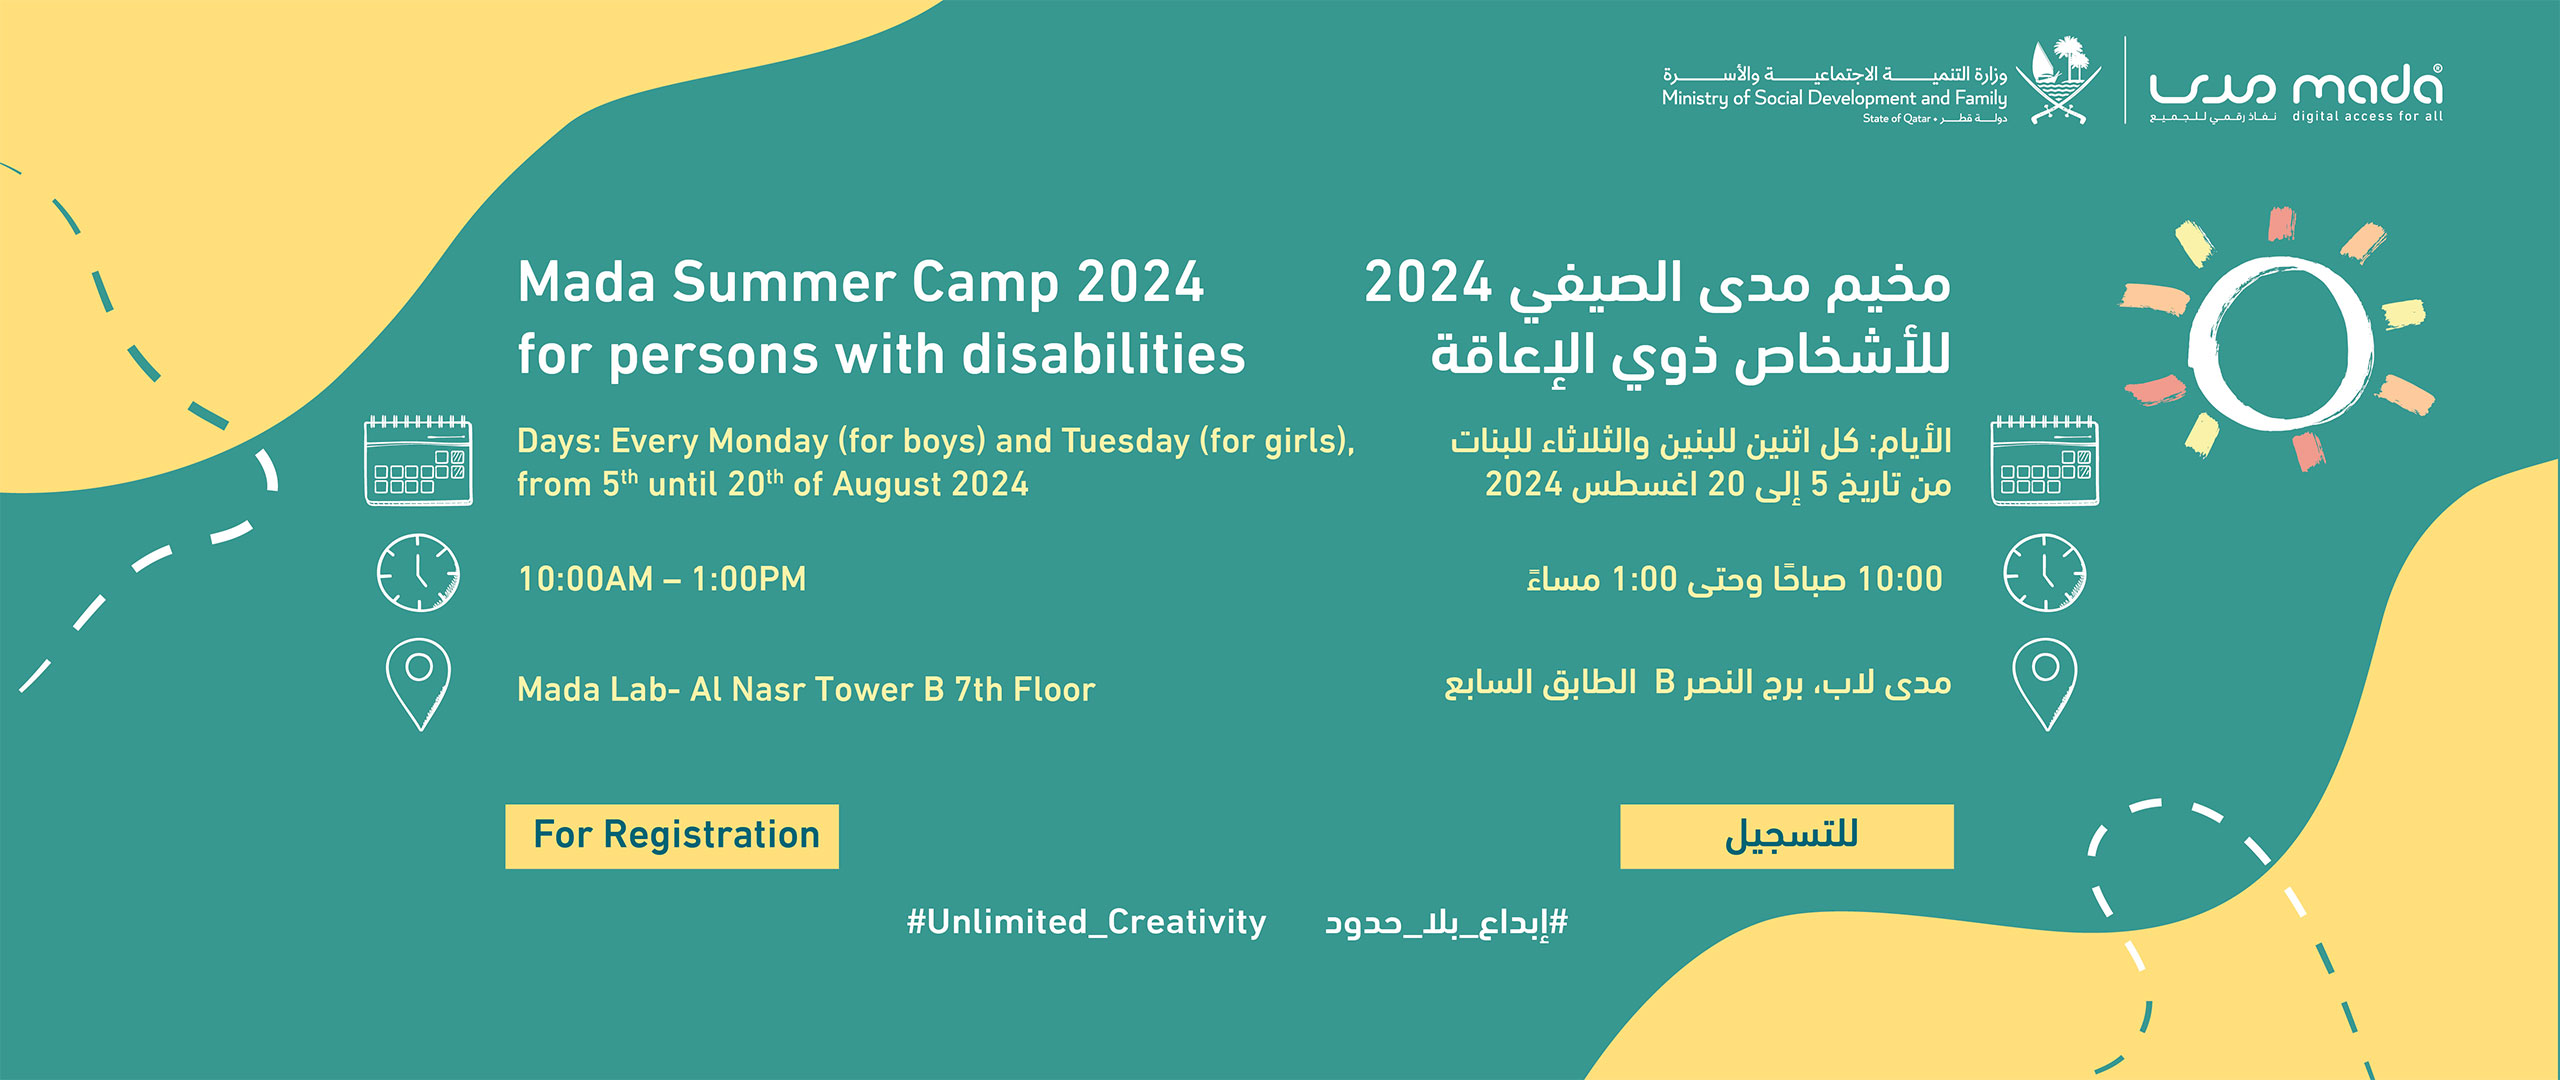 Mada Summer Camp 2024 for persons with disabilities